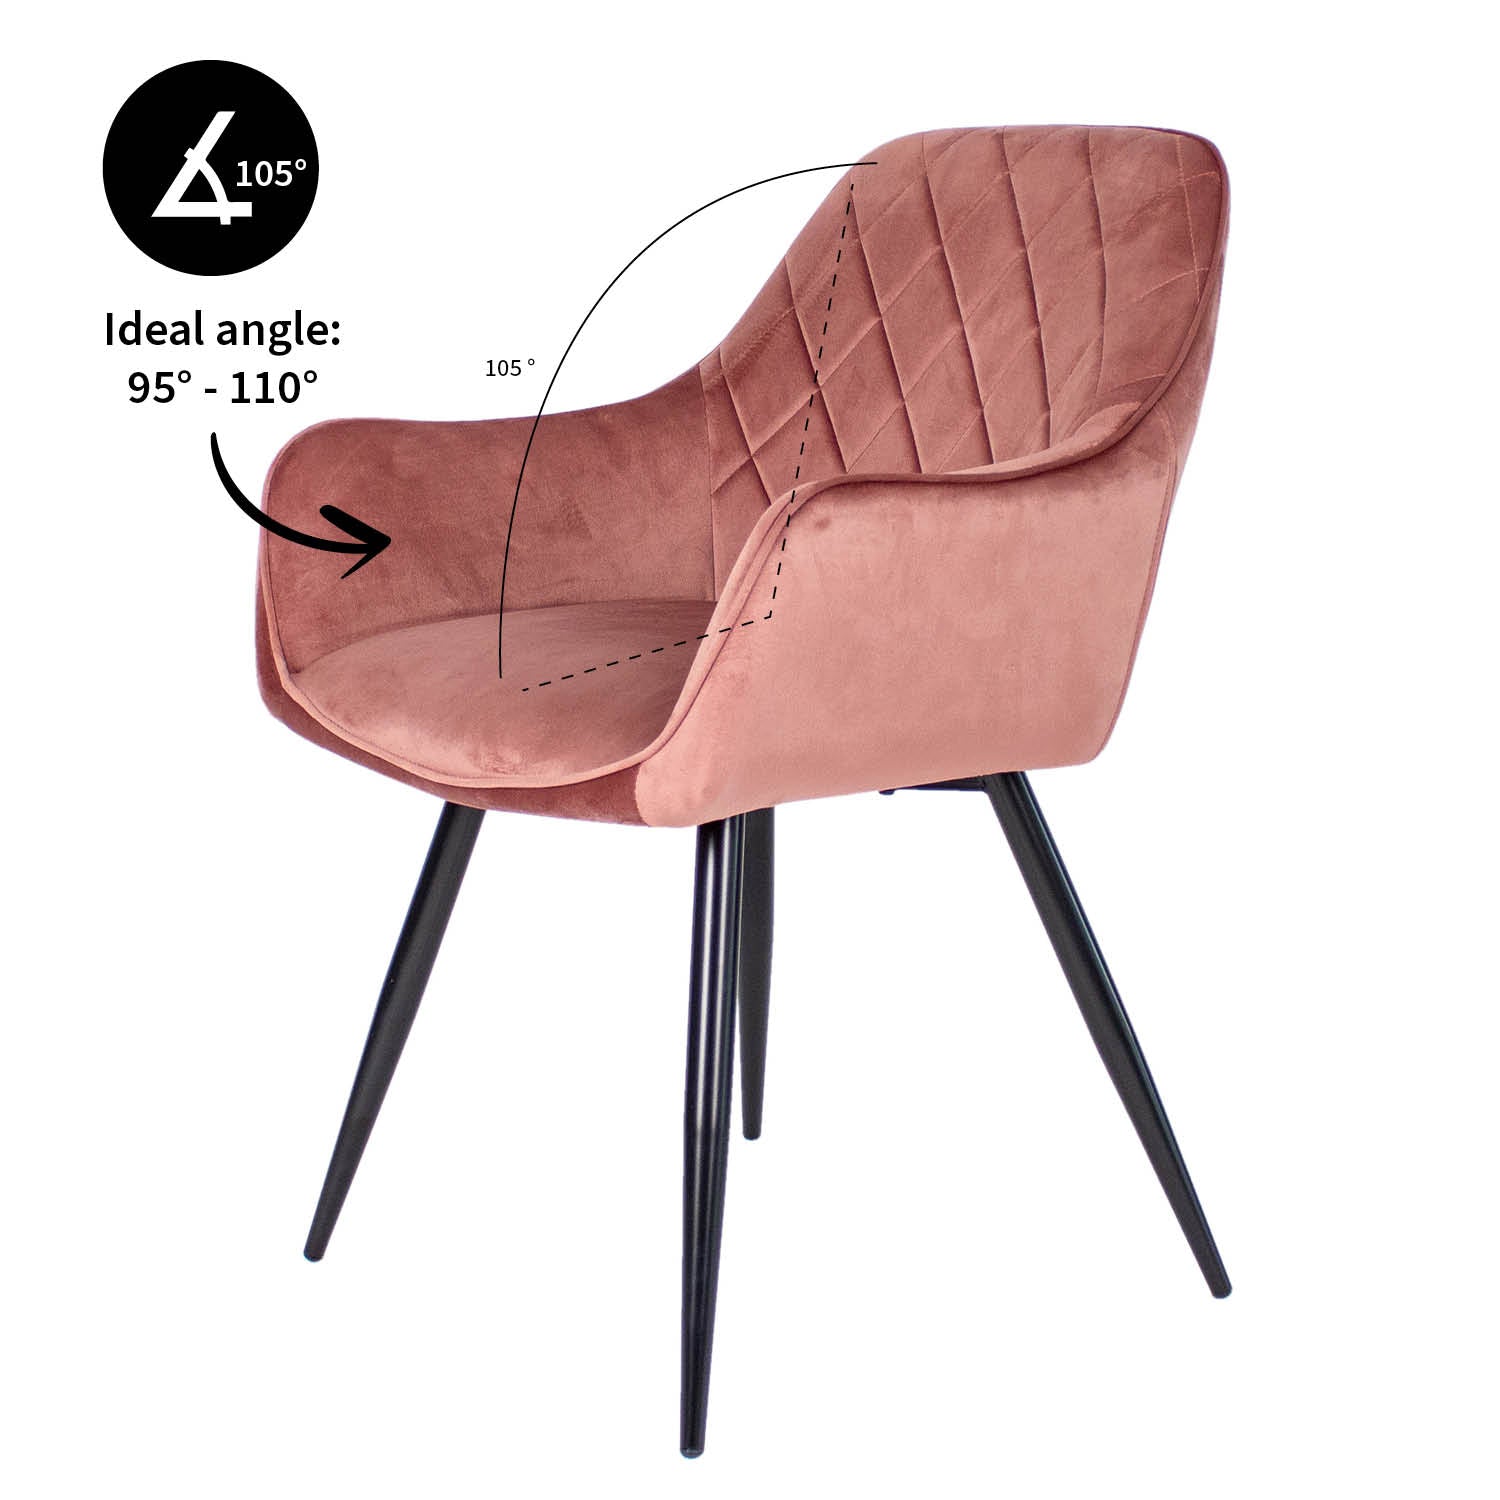 Kick dining room chair Monza